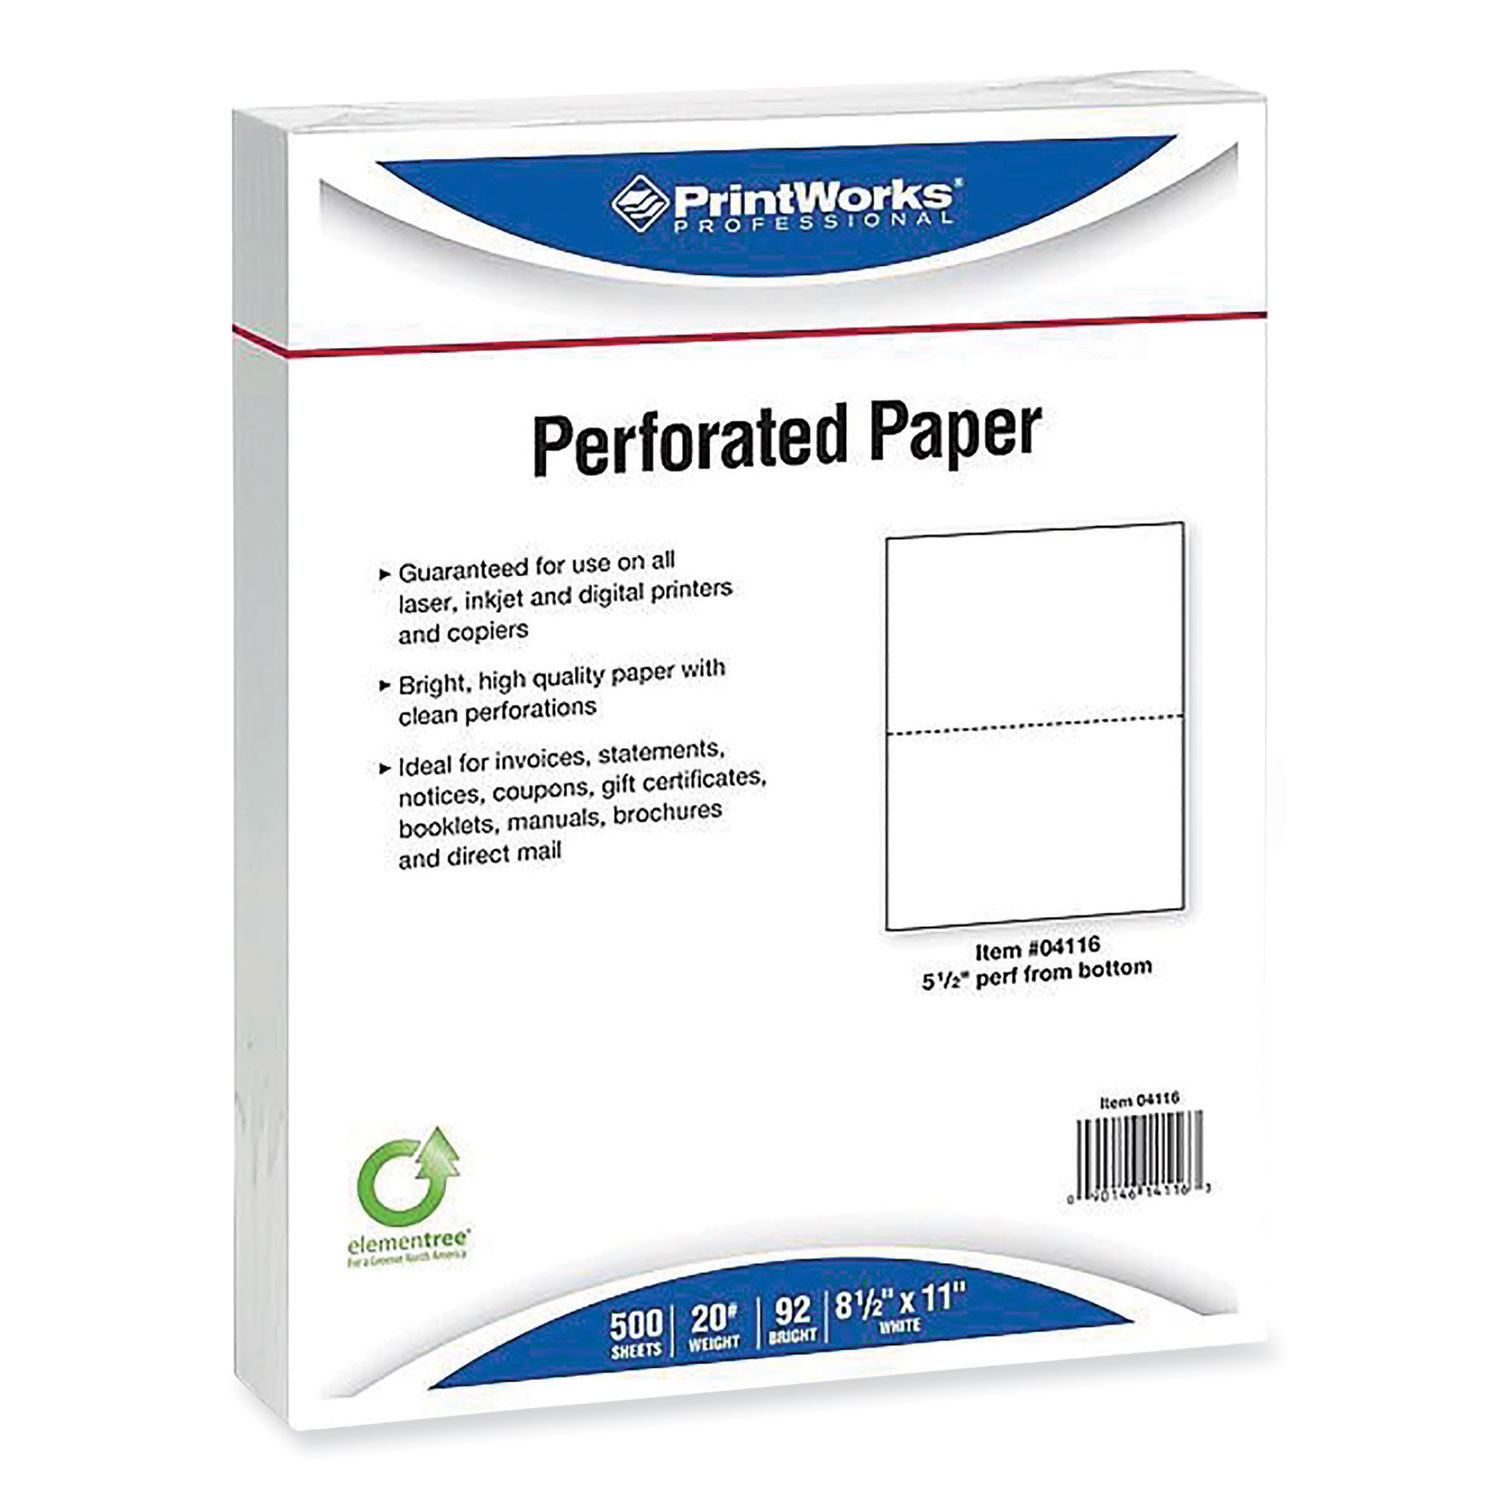 Perforated and Punched Paper, 20 lb Bond Weight, 8.5 x 11, White